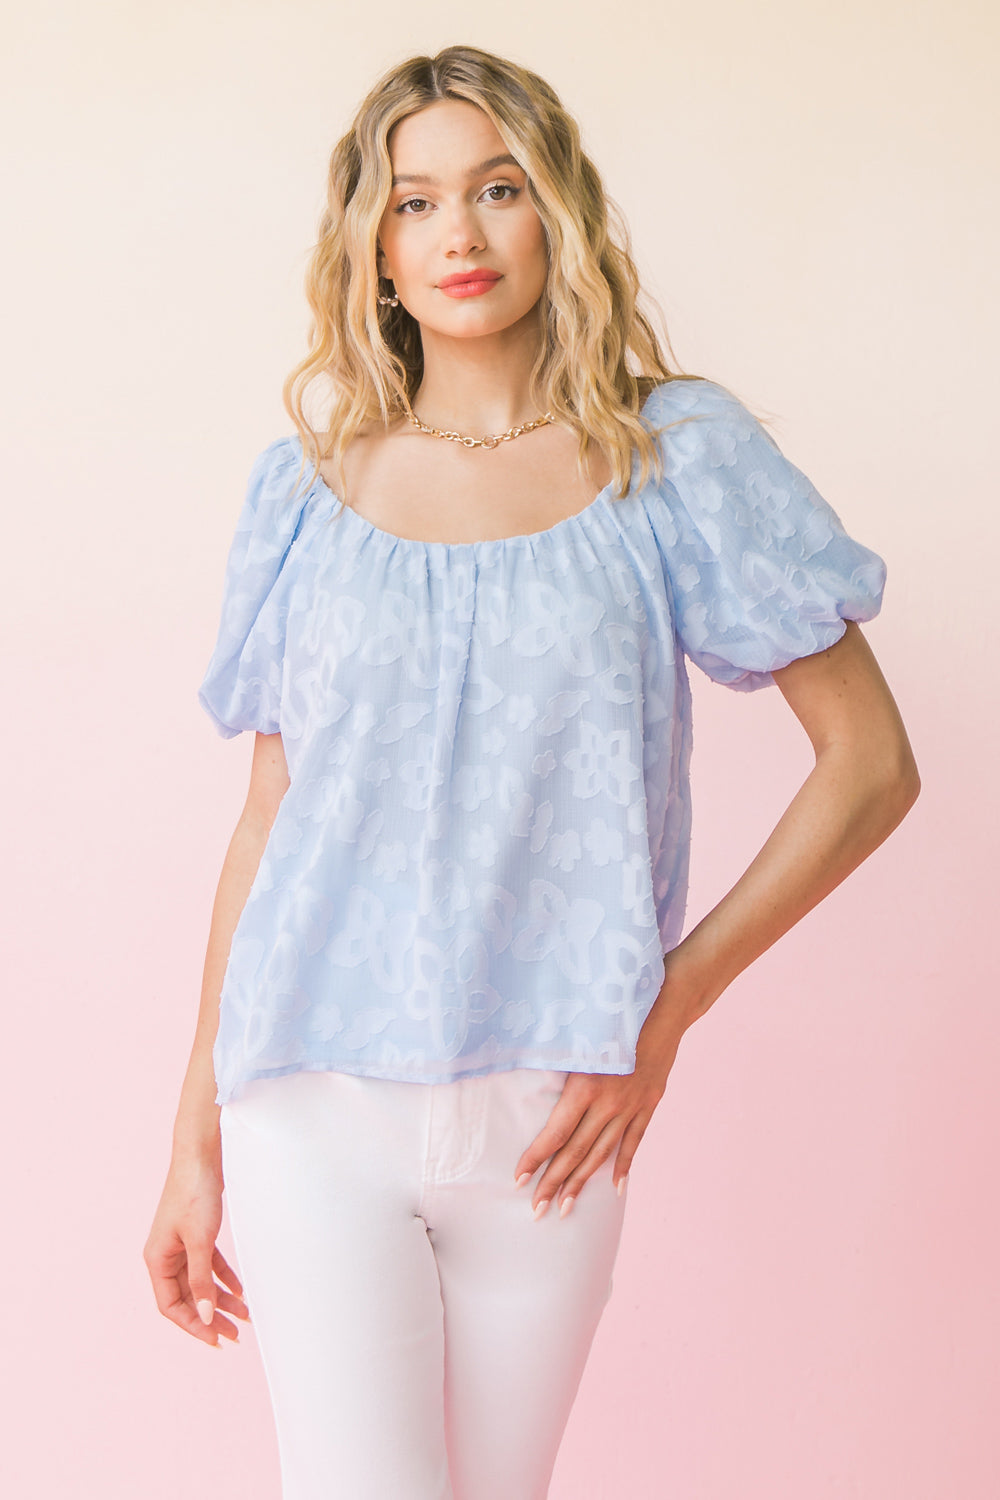 FULL OF FRILLS WOVEN TOP